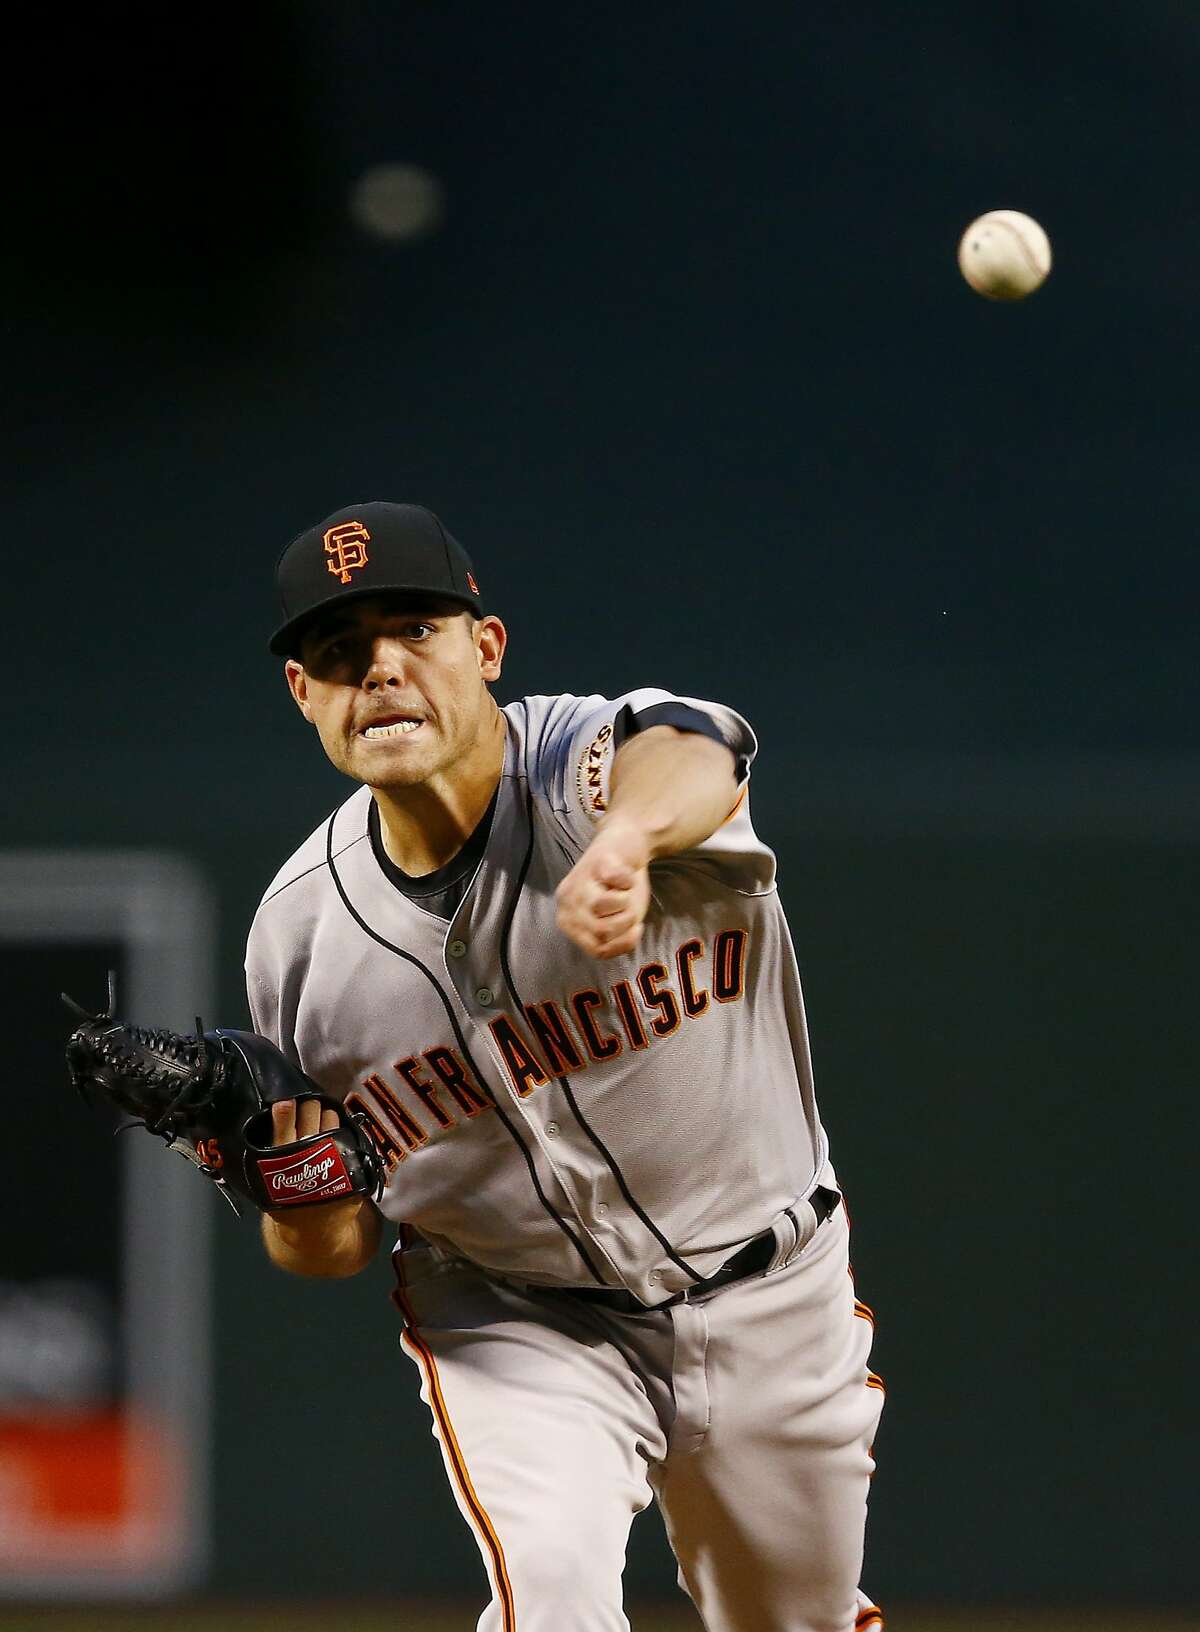 San Francisco Giants' Matt Moore warms up during the first inning of a baseball game against the Arizona Diamondbacks Wednesday, April 5, 2017, in Phoenix. (AP Photo/Ross D. Franklin)